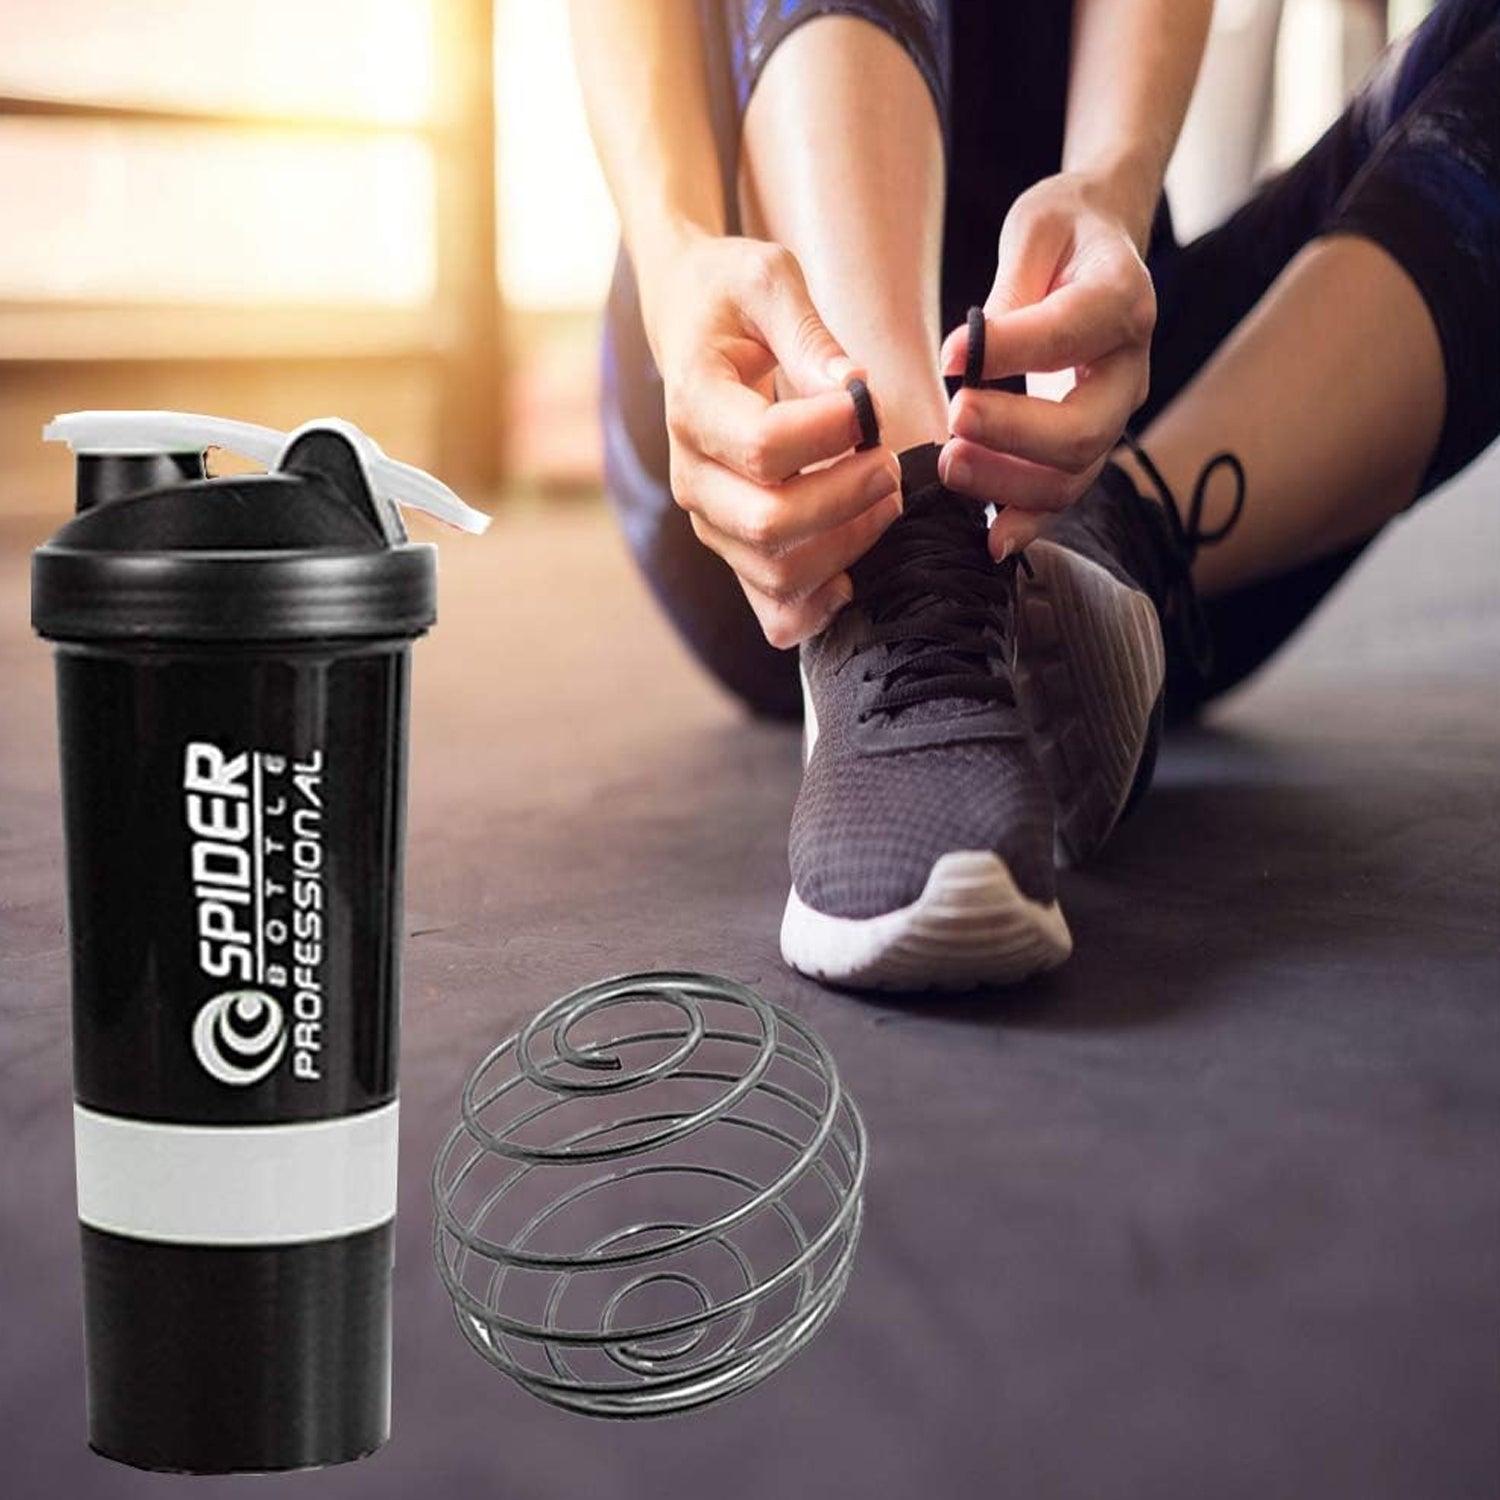 1771 SHAKER BOTTLE FOR GYM|GYM SHAKER|SIPPER BOTTLE|BPA-FREE AND 100% LEAK-PROOF PROTEIN SHAKER BOTTLE WITH 2 EXTRA STORAGE COMPARTMENT (500ML SHAKER) DeoDap